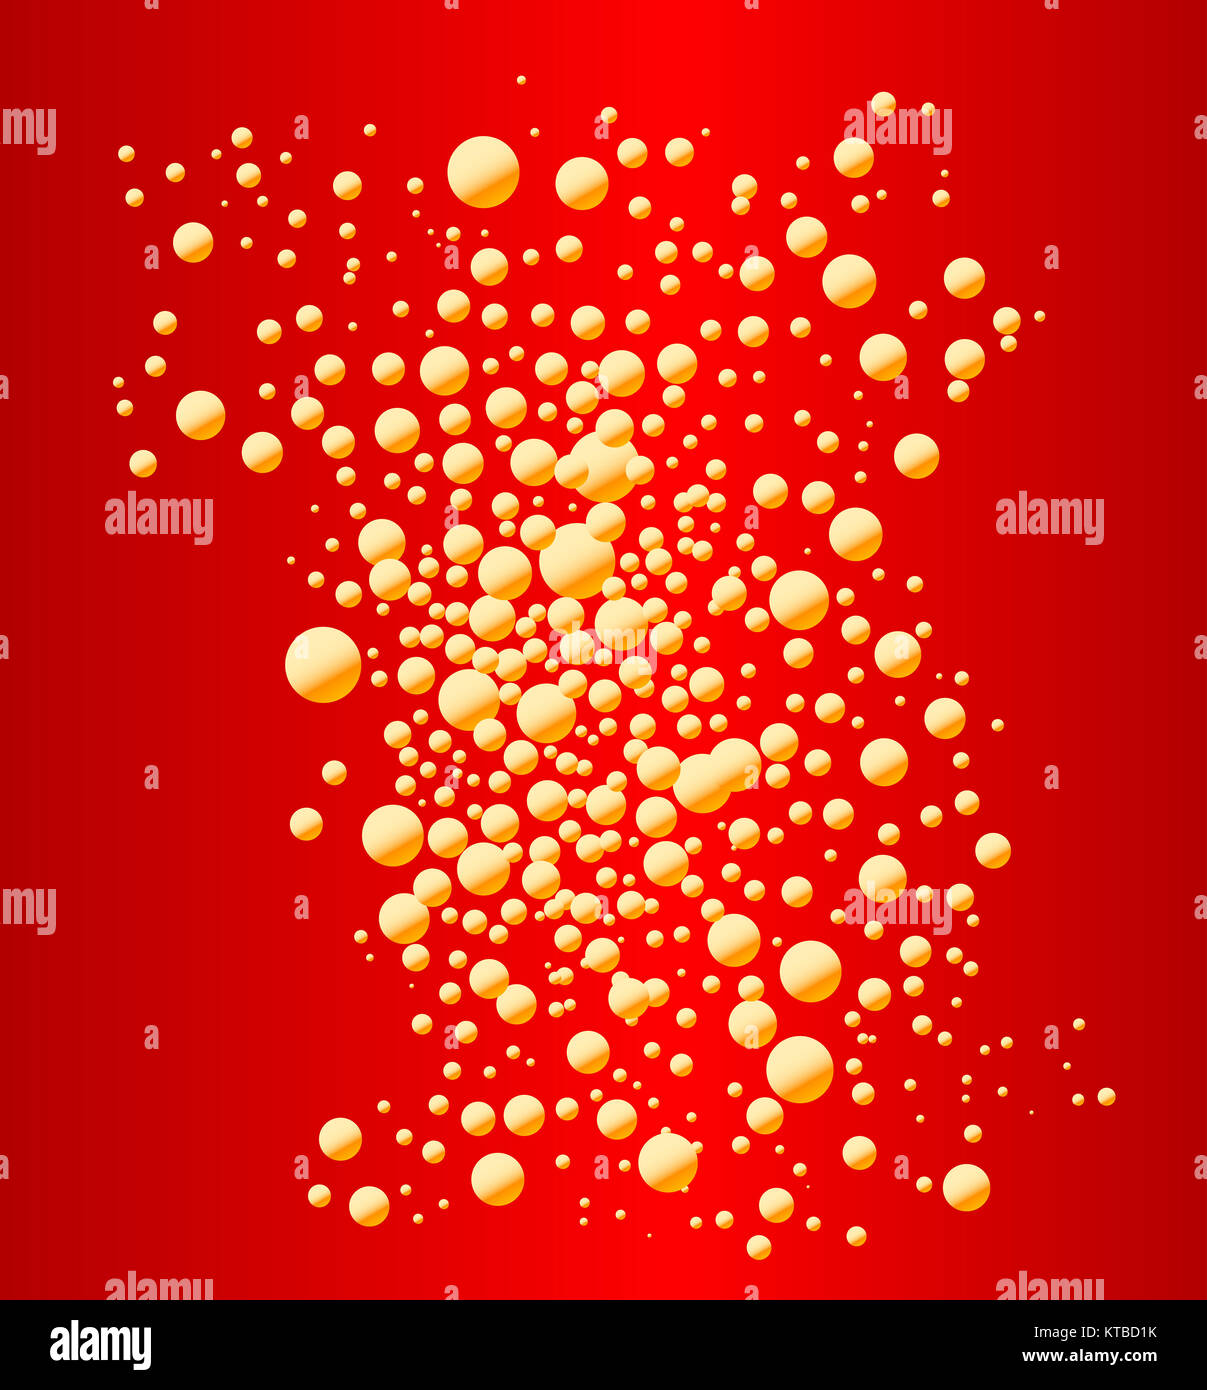 Red Party Bubble Background Stock Photo